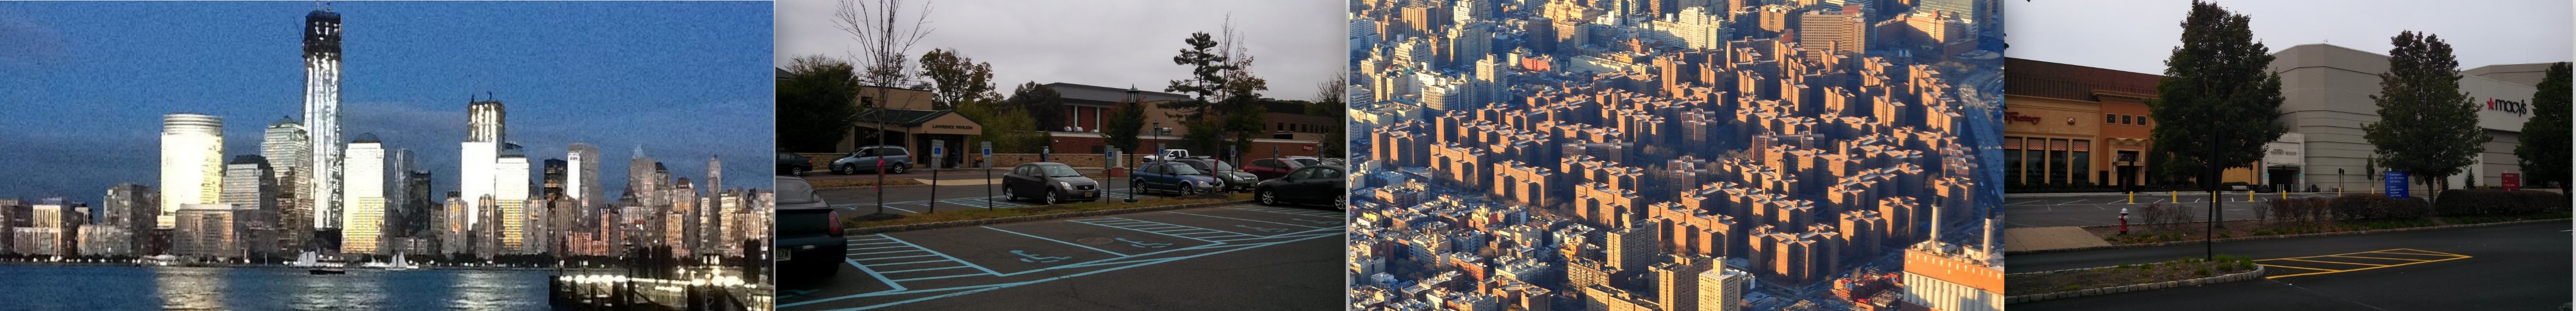 1. Downtown, 2. Summit Medical Group, 3. Stuvesant Town-Peter Cooper Village, 4. Short Hills Mall